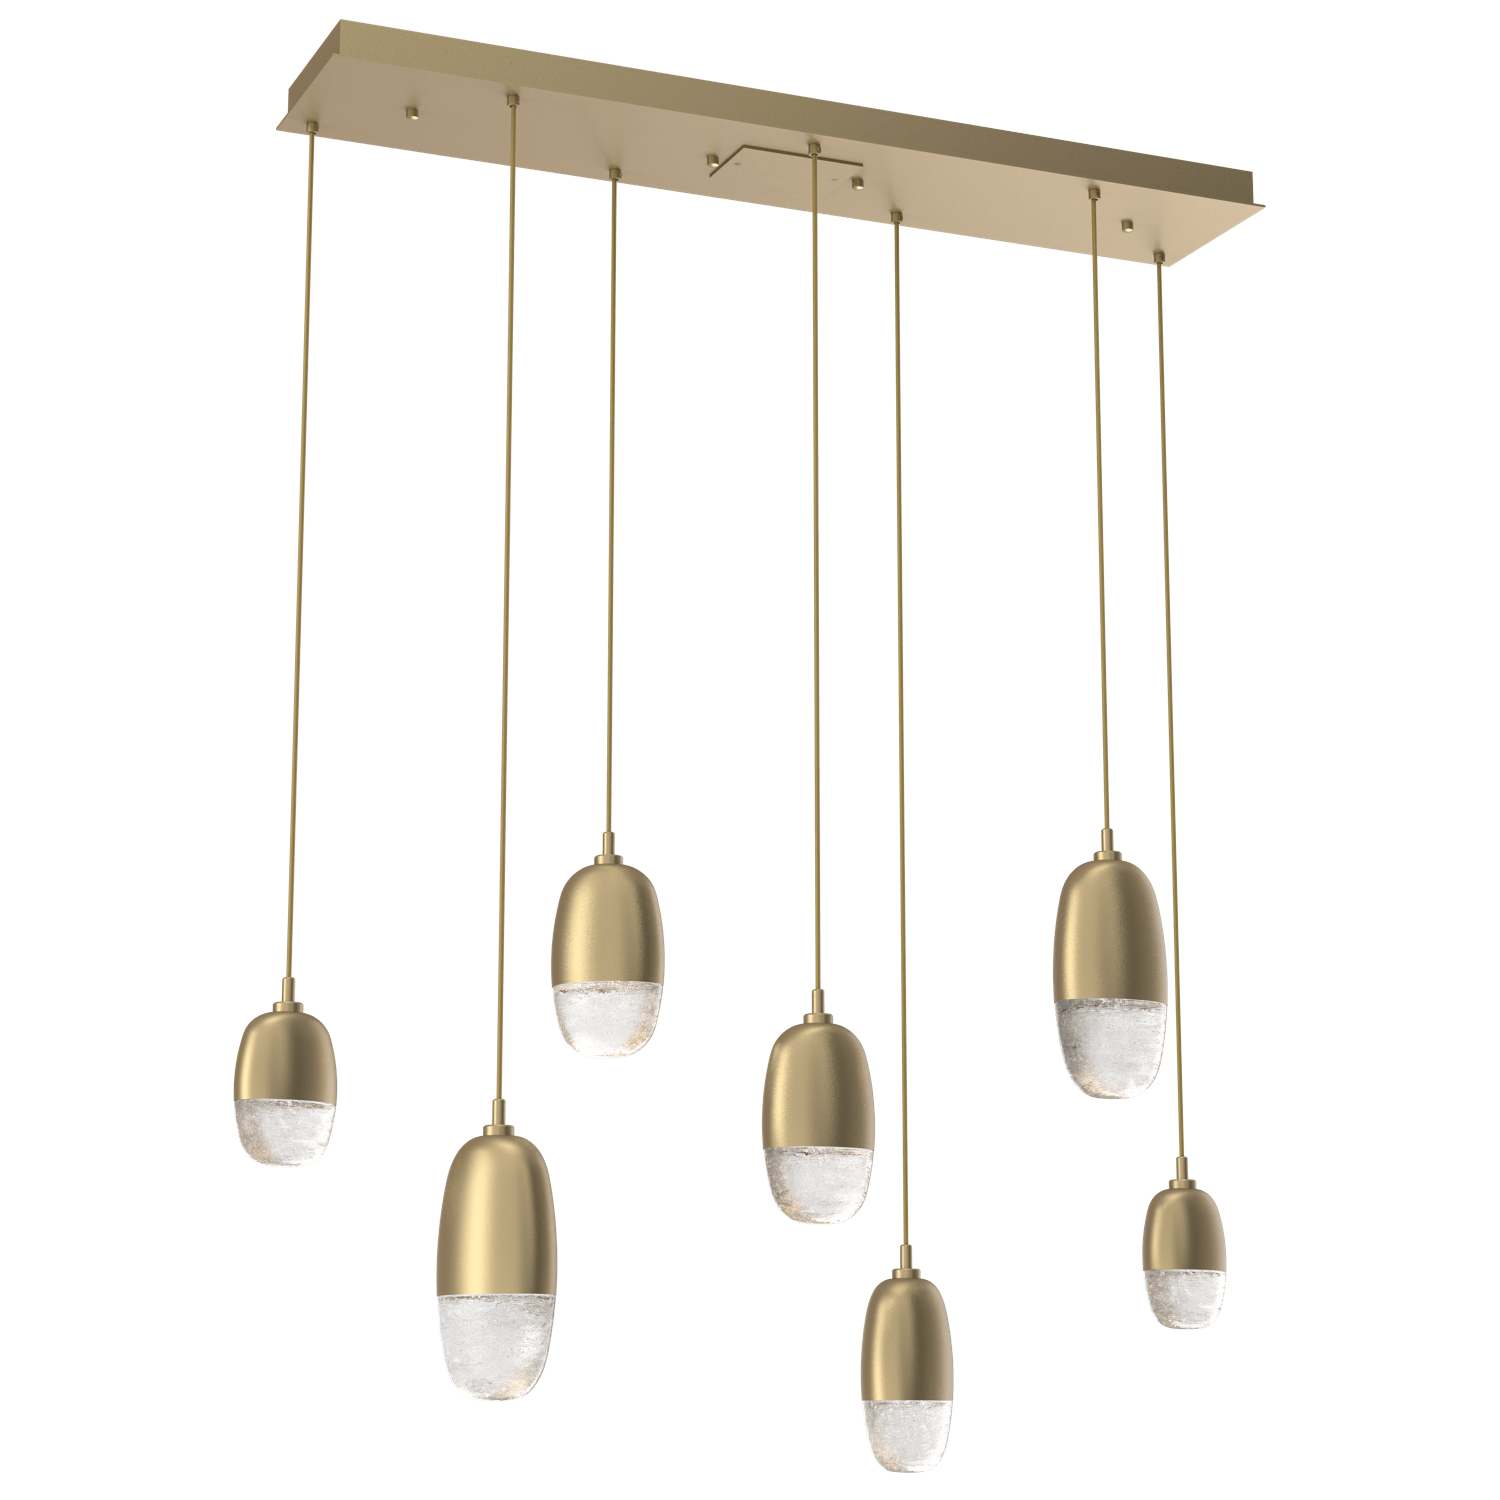 PLB0079-07-GB-Hammerton-Studio-Pebble-7-light-linear-pendant-chandelier-with-gilded-brass-finish-and-clear-cast-glass-shades-and-LED-lamping